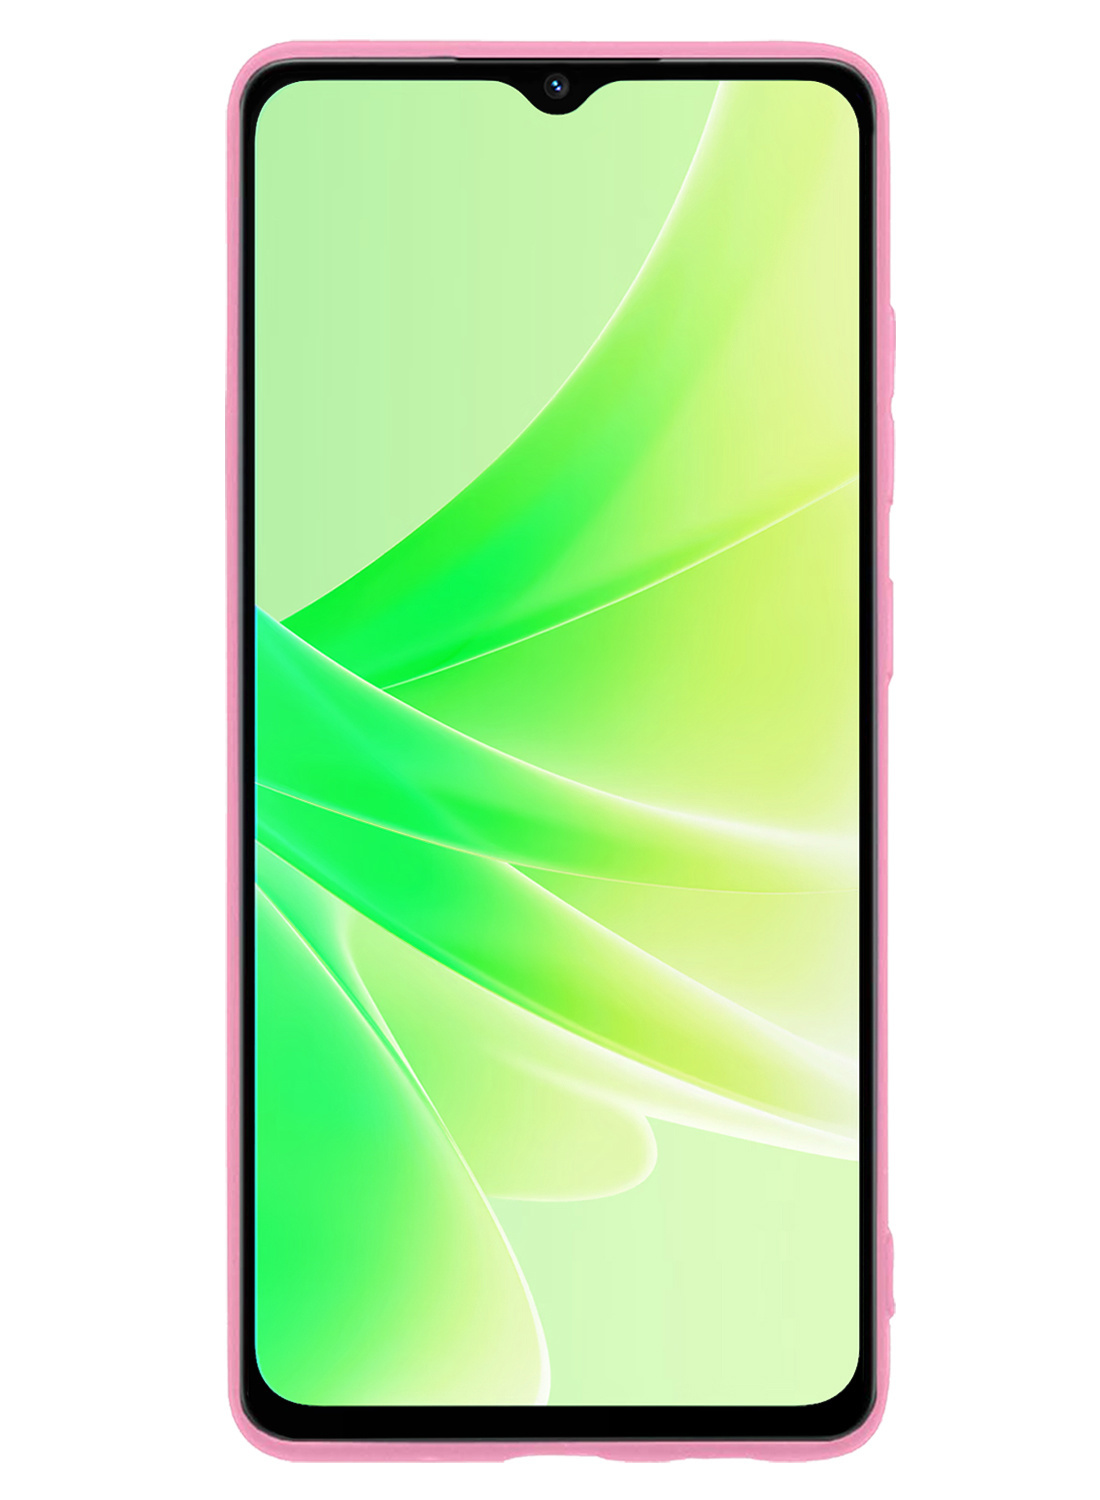 Nomfy OPPO A57s Hoesje Siliconen Case Back Cover Met 2x Screenprotector - OPPO A57s Hoes Cover Silicone - Licht Roze